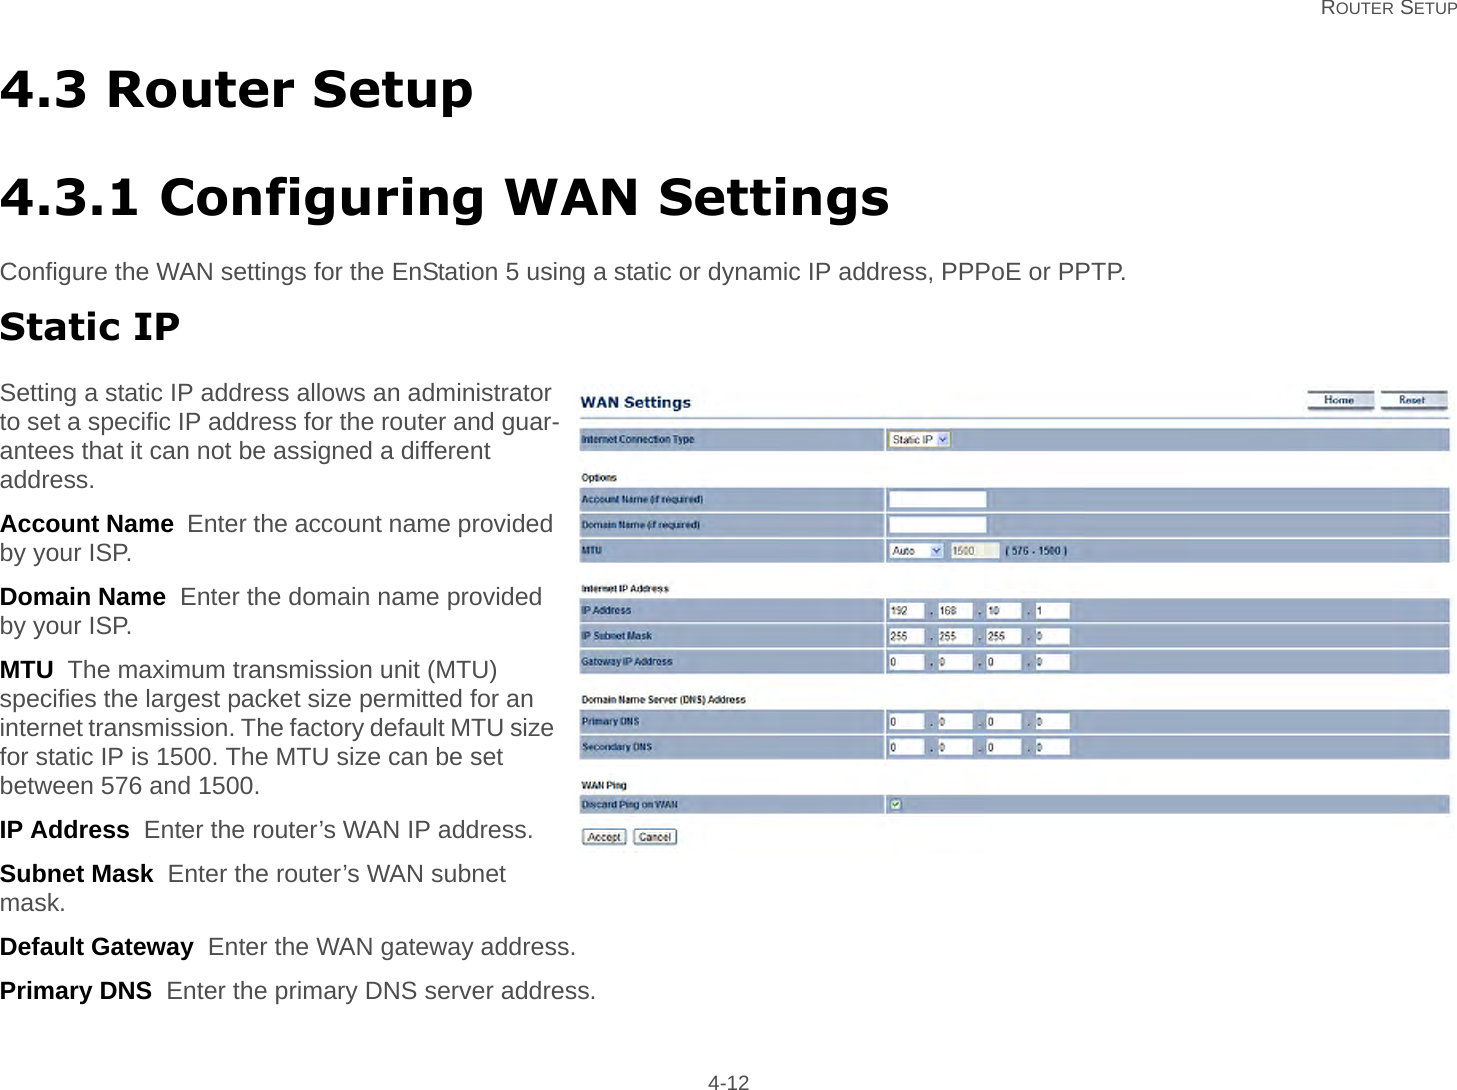   ROUTER SETUP 4-124.3 Router Setup4.3.1 Configuring WAN SettingsConfigure the WAN settings for the EnStation 5 using a static or dynamic IP address, PPPoE or PPTP.Static IPSetting a static IP address allows an administrator to set a specific IP address for the router and guar-antees that it can not be assigned a different address.Account Name  Enter the account name provided by your ISP.Domain Name  Enter the domain name provided by your ISP.MTU  The maximum transmission unit (MTU) specifies the largest packet size permitted for an internet transmission. The factory default MTU size for static IP is 1500. The MTU size can be set between 576 and 1500.IP Address  Enter the router’s WAN IP address.Subnet Mask  Enter the router’s WAN subnet mask.Default Gateway  Enter the WAN gateway address.Primary DNS  Enter the primary DNS server address.